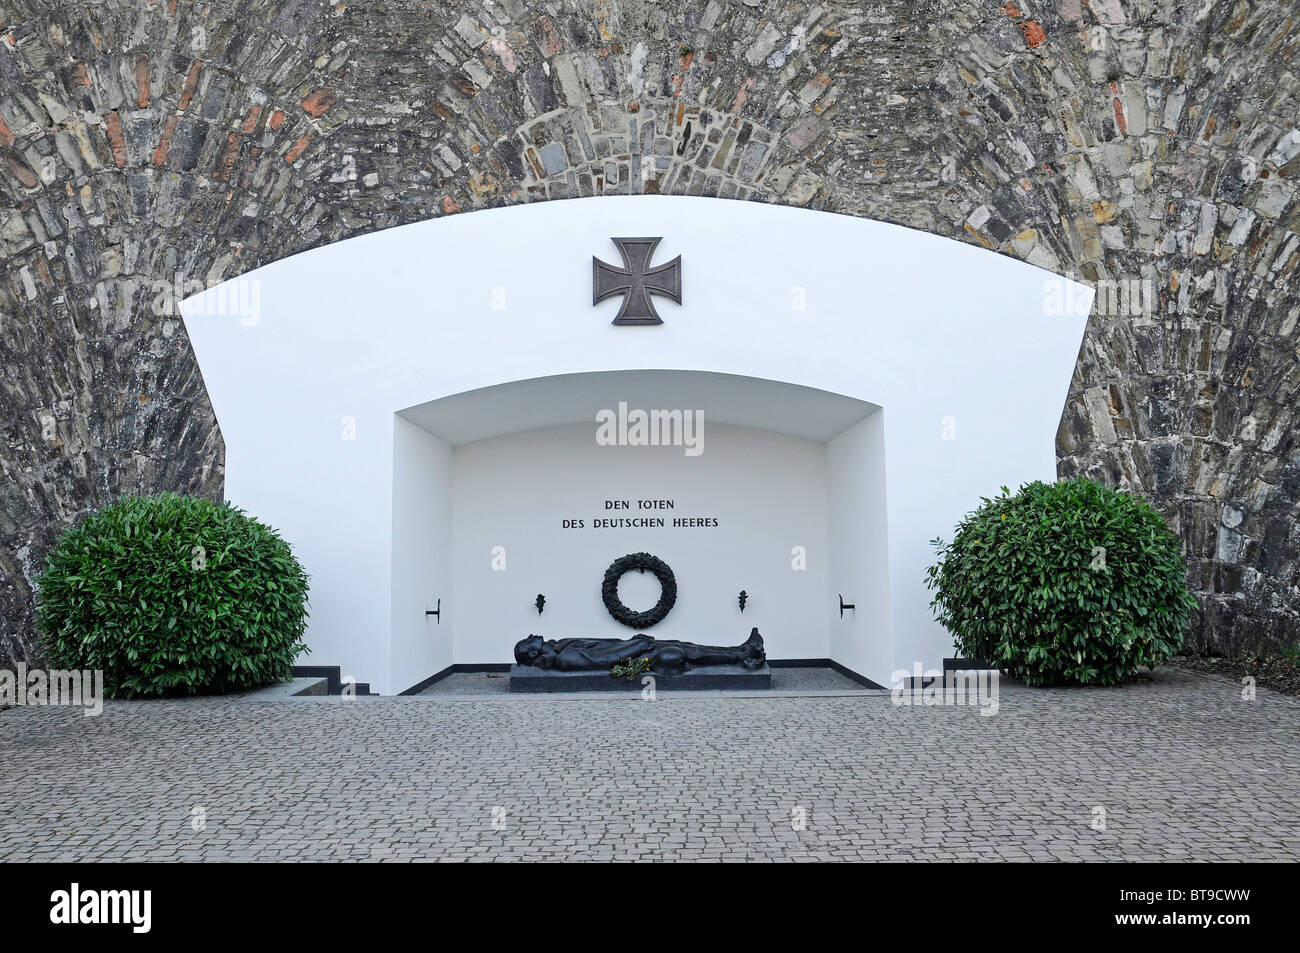 Iron Cross, symbol, war decorations, medals, casualties of the Army, War Memorial, Ehrenbreitstein Fortress, Koblenz Stock Photo